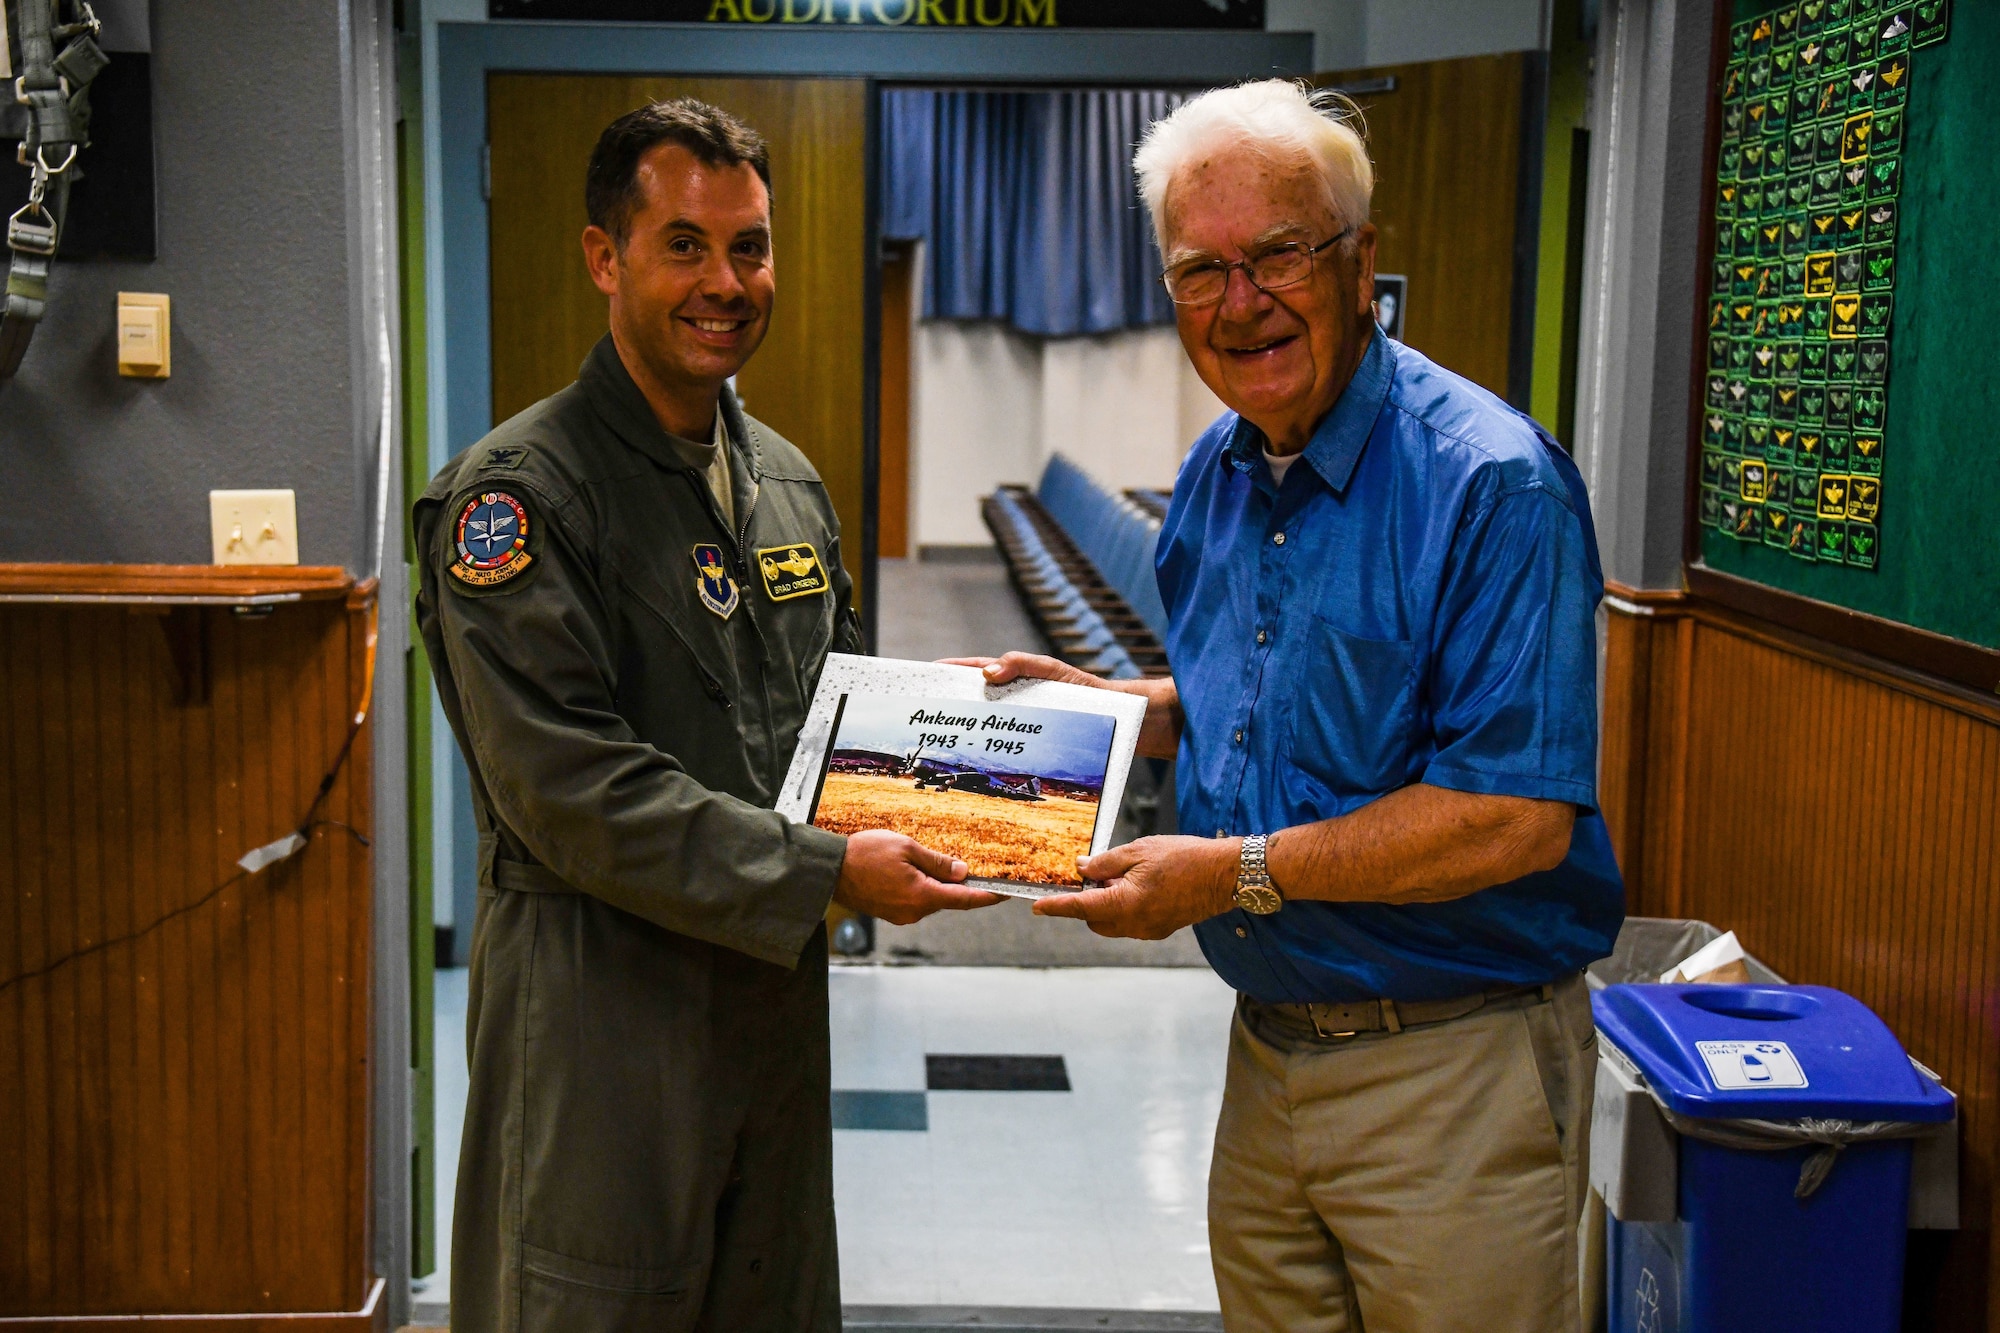 Air Force commander holds photo book with Norwegian man.